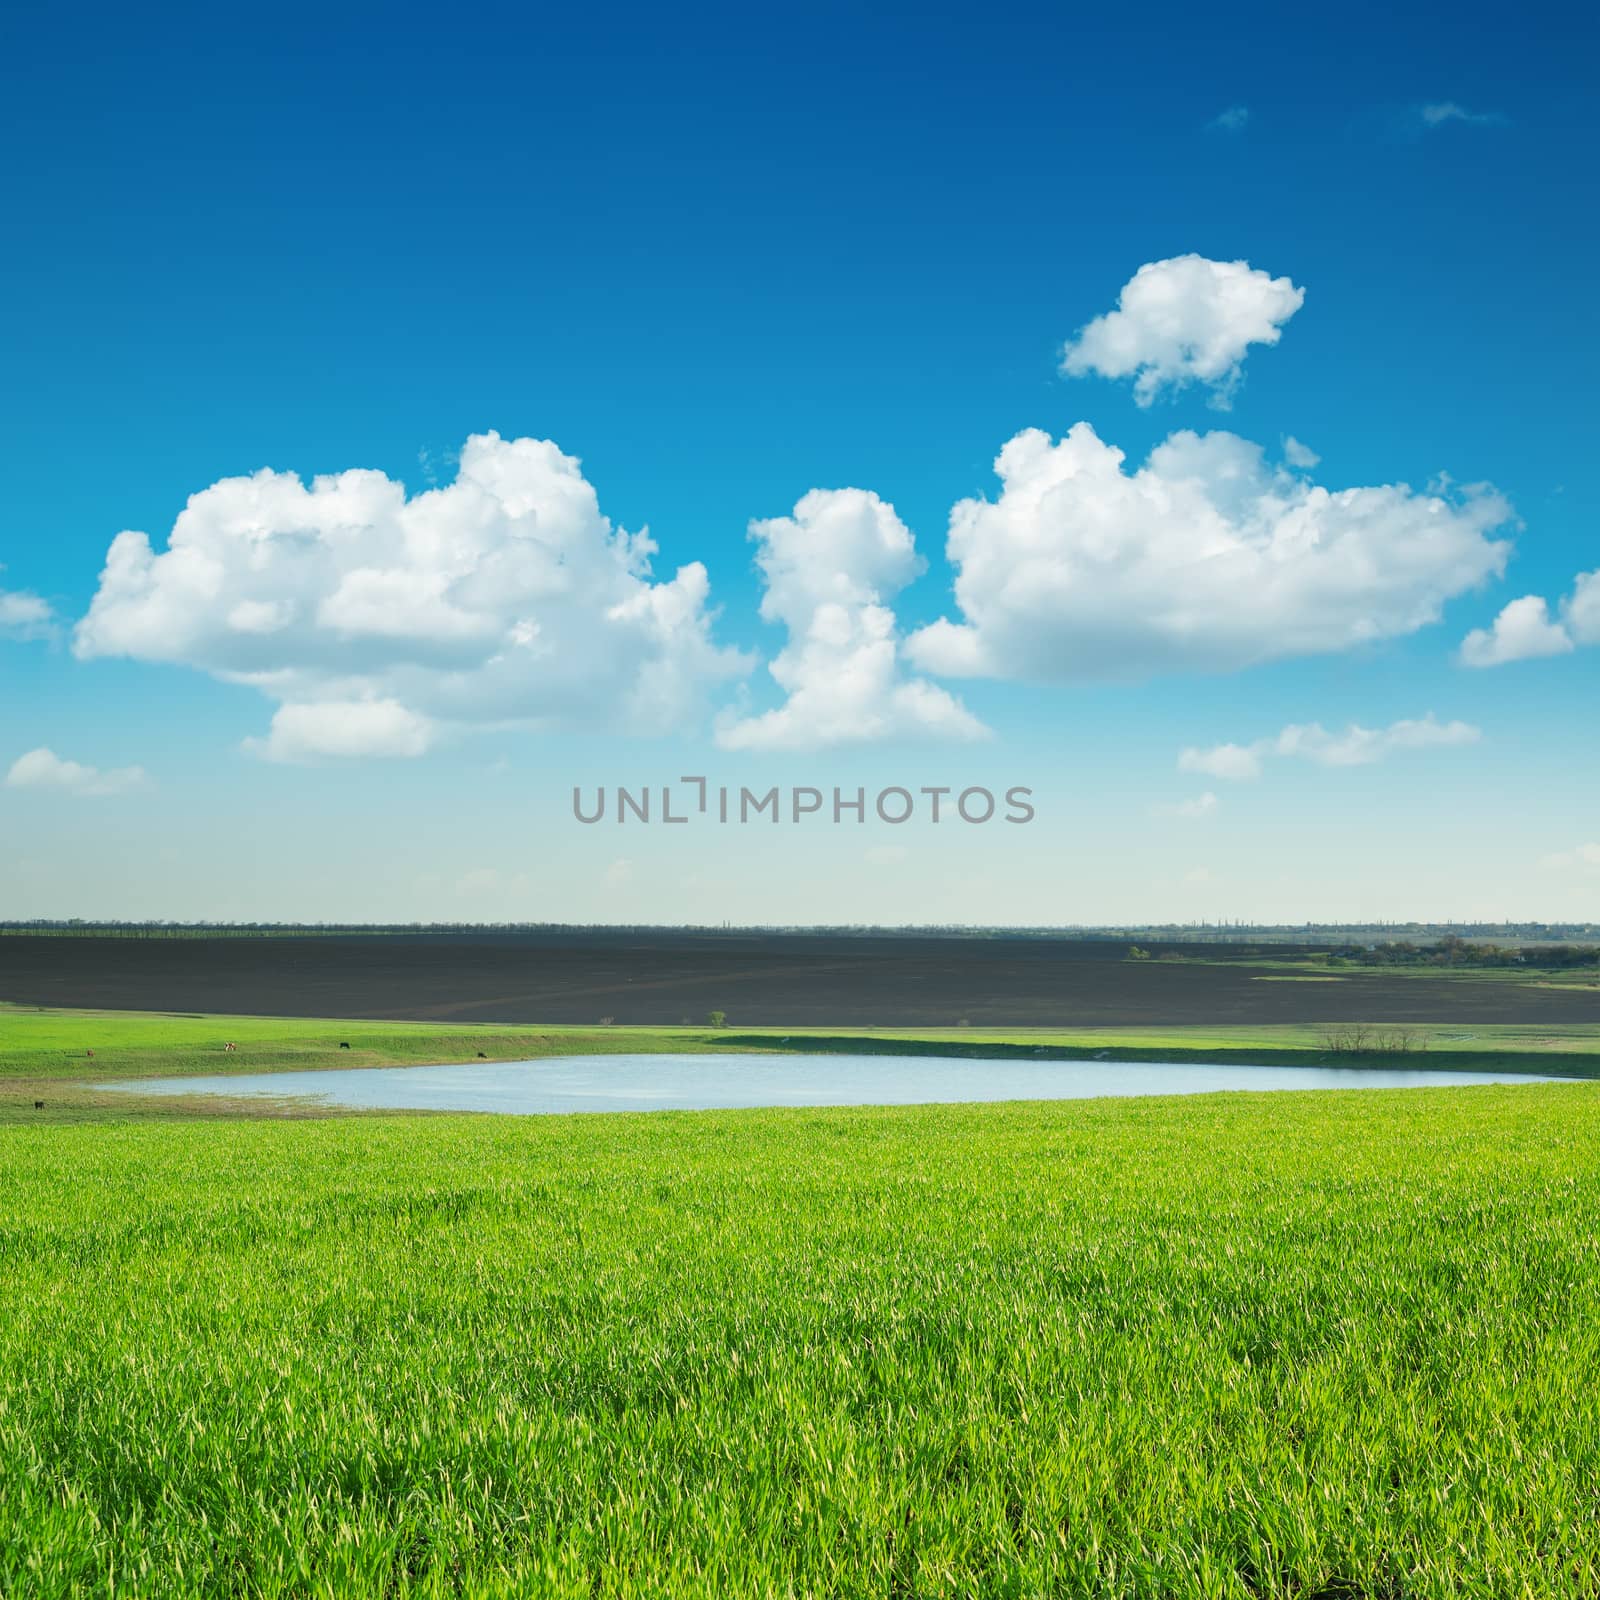 green lanscape with pond under blue sky